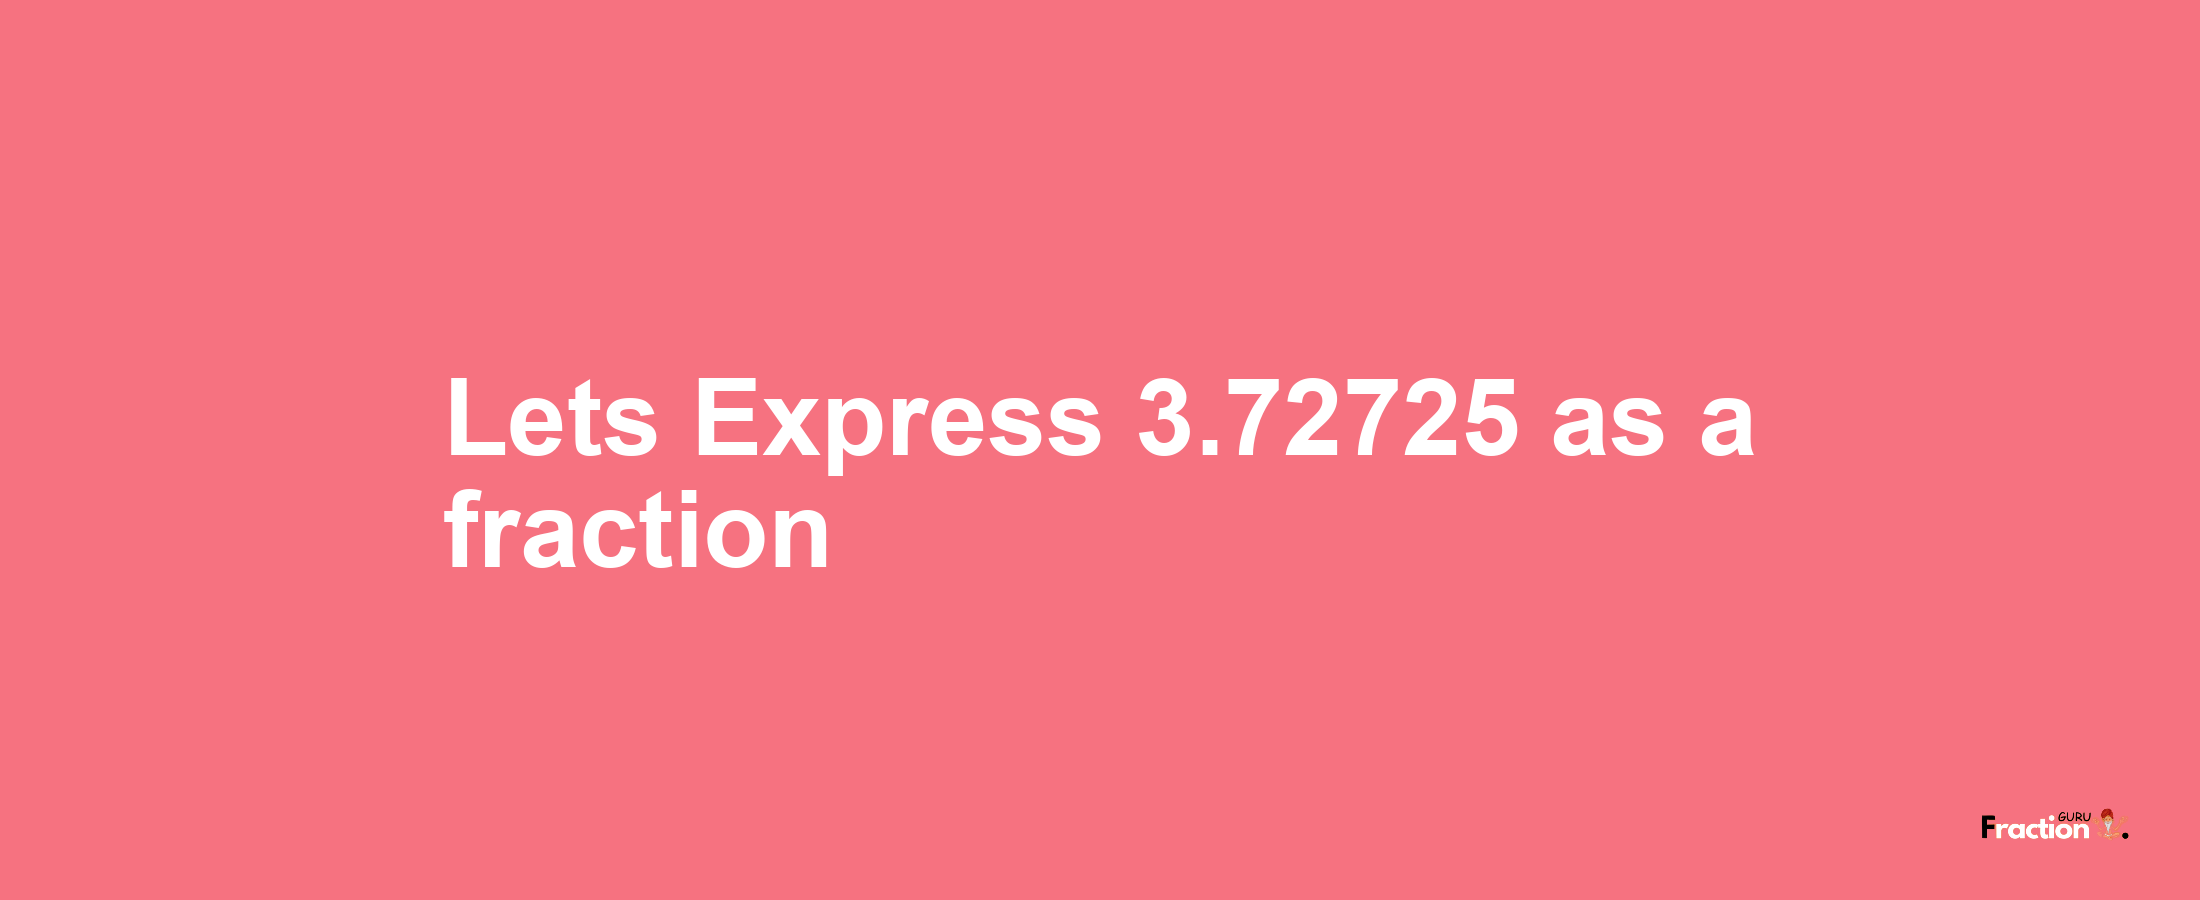 Lets Express 3.72725 as afraction